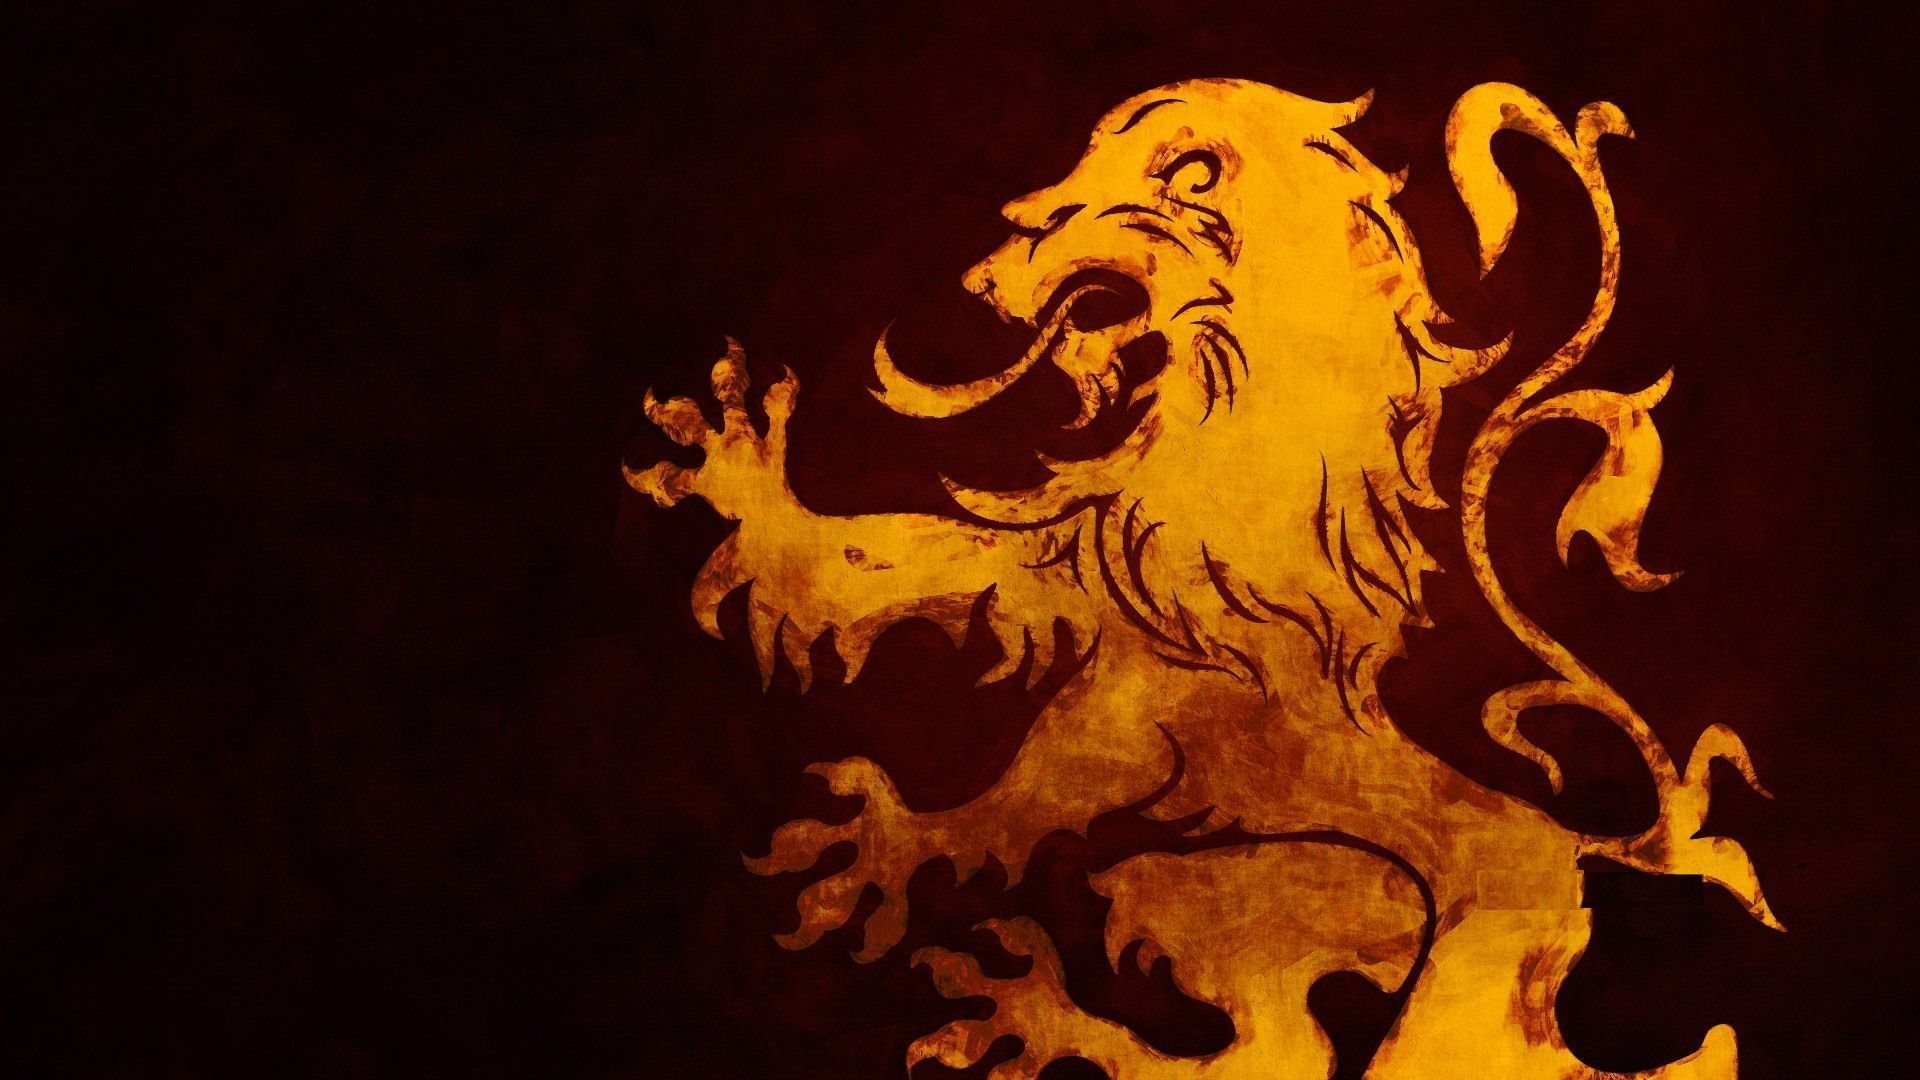 Game Of Thrones HD Wallpaper, Game Of Thrones Images, New Wallpapers